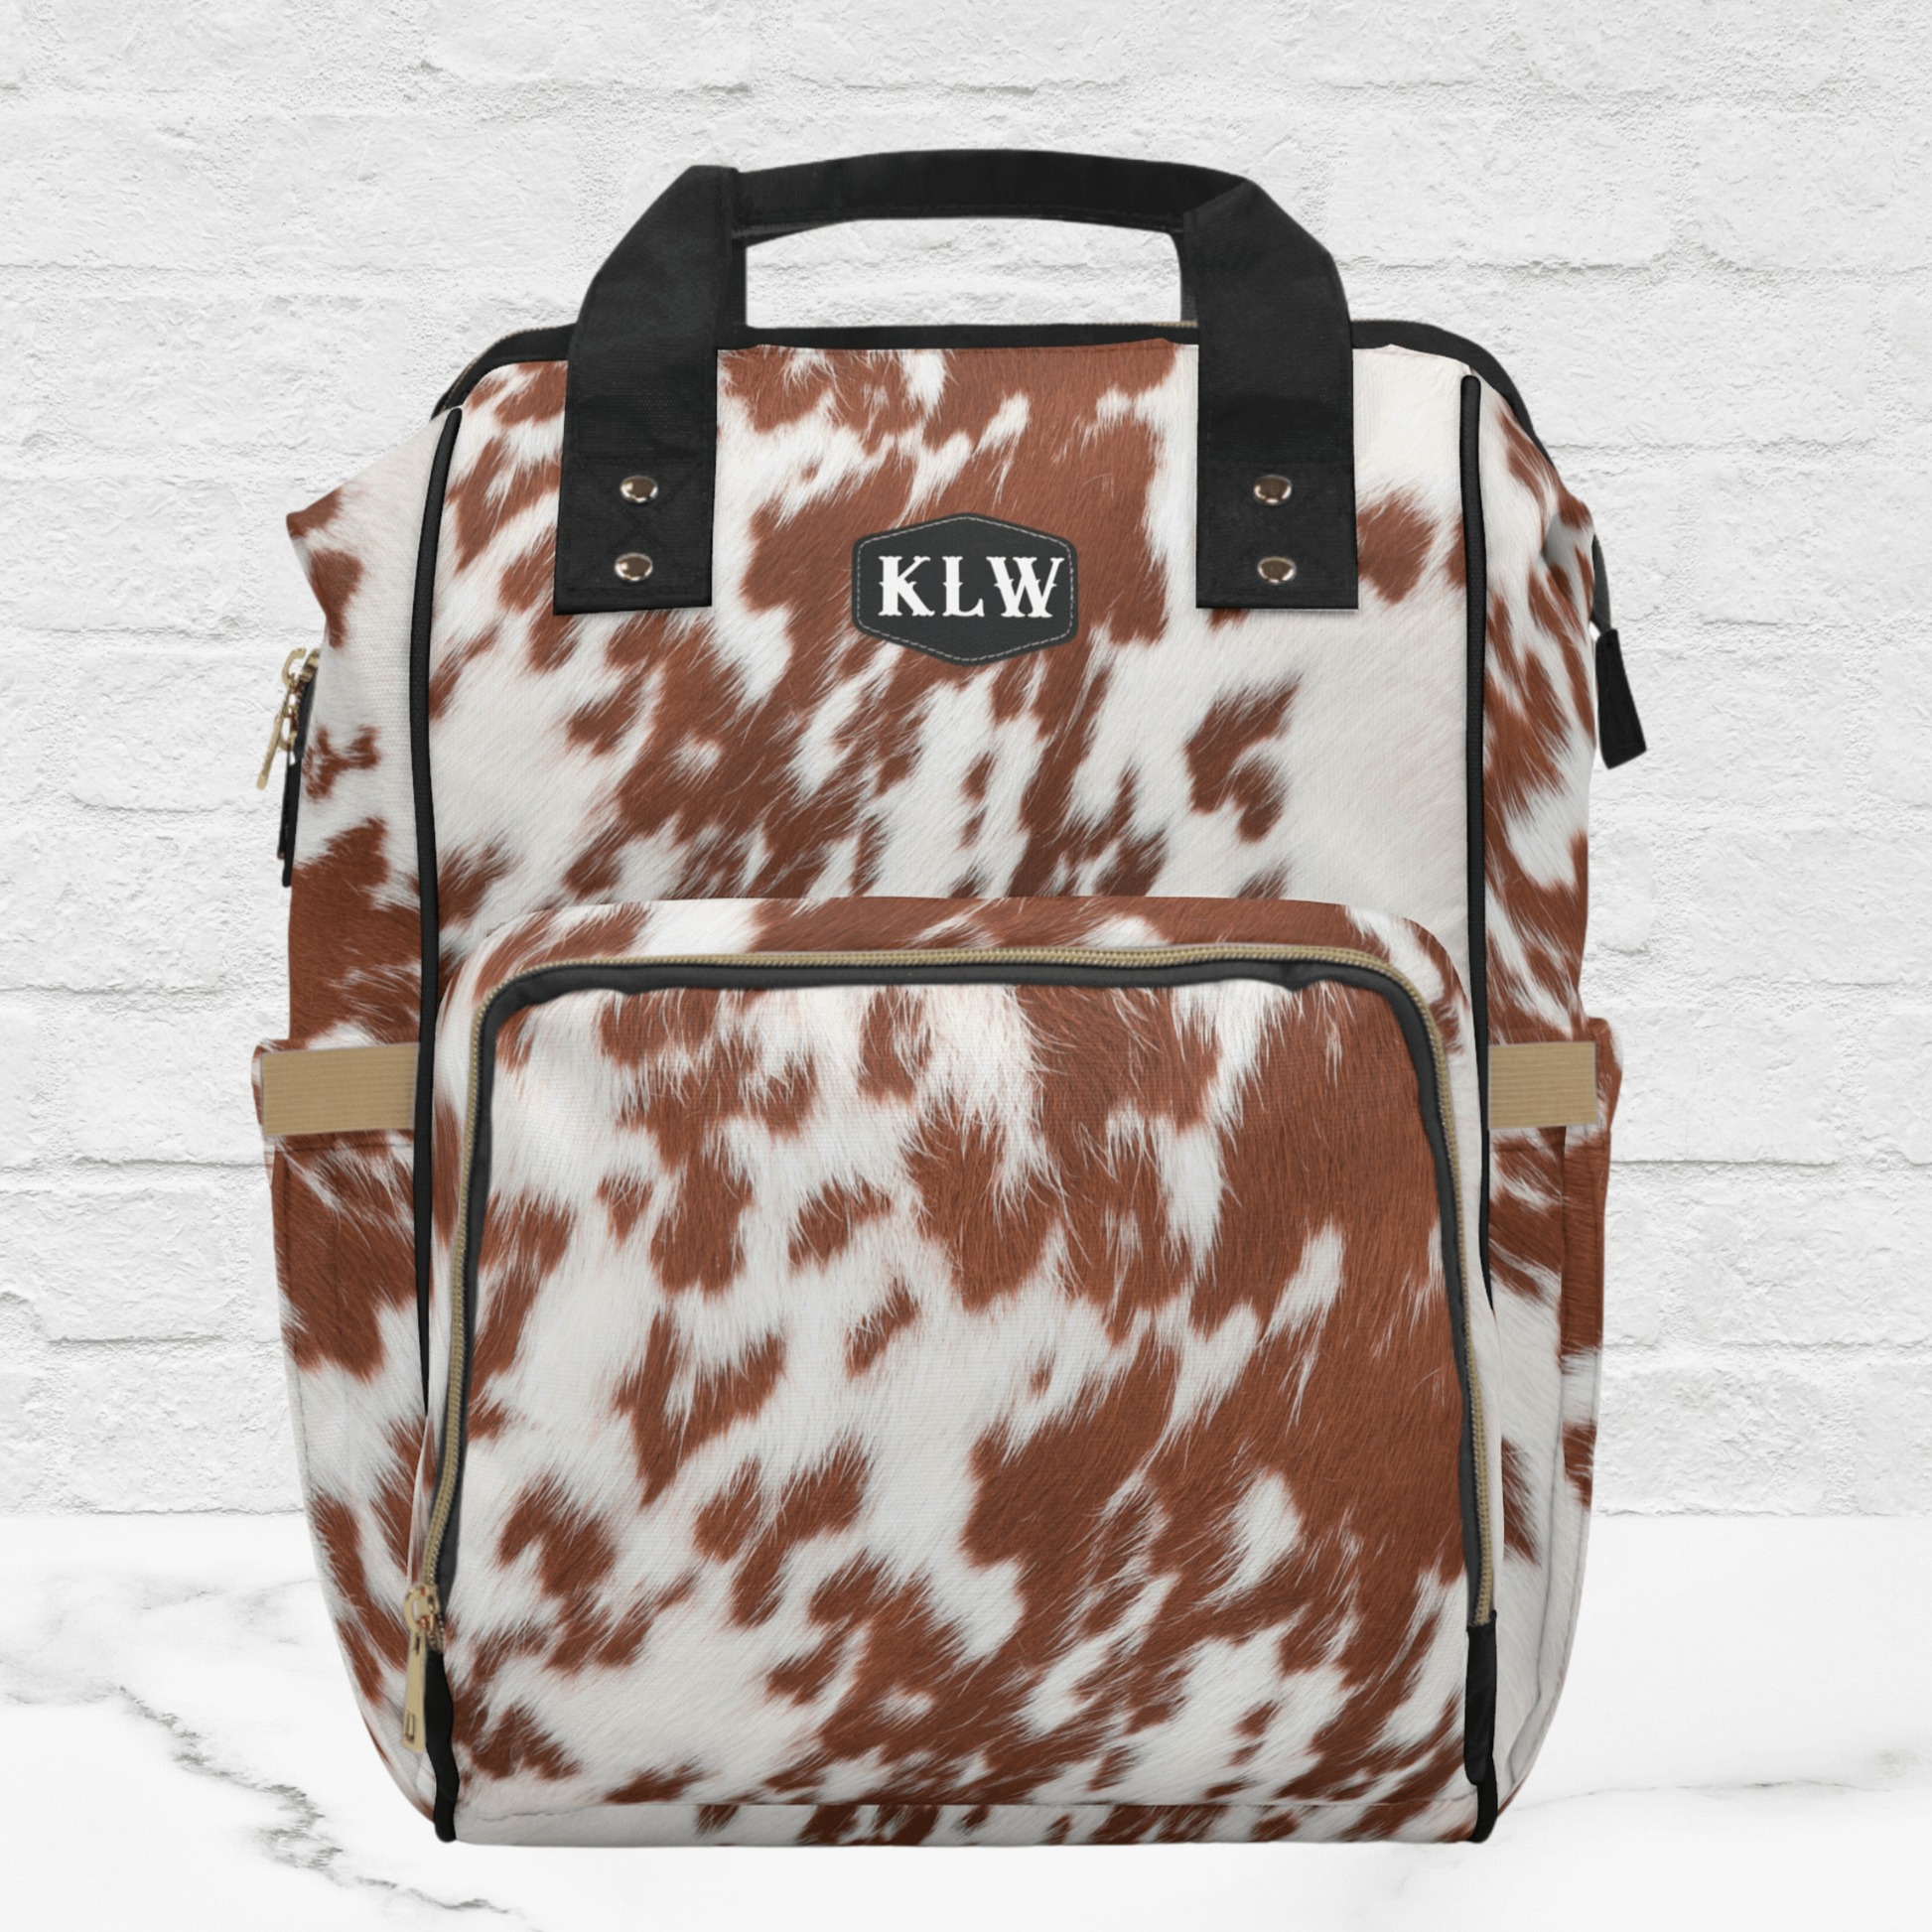 Our Western style cowhide print diaper bag backpack is rust and white cowhide with black handles and black patch for monogram